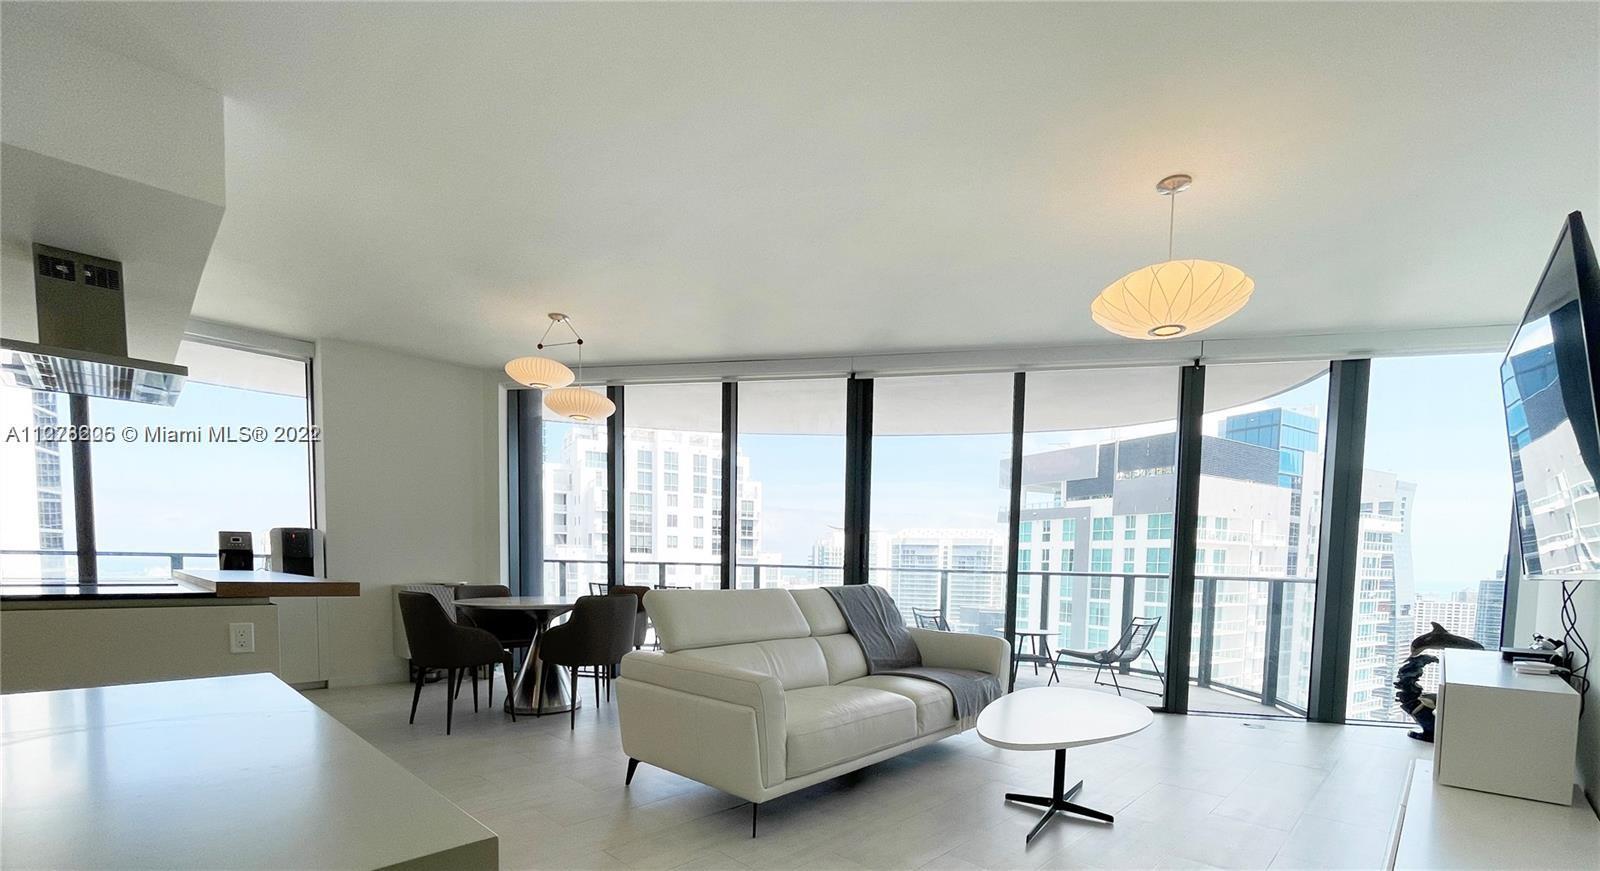 For tours or more info: 3O5-399-42OO. Brickell Flatiron, the Ultra-Luxury Condo developed by the ren